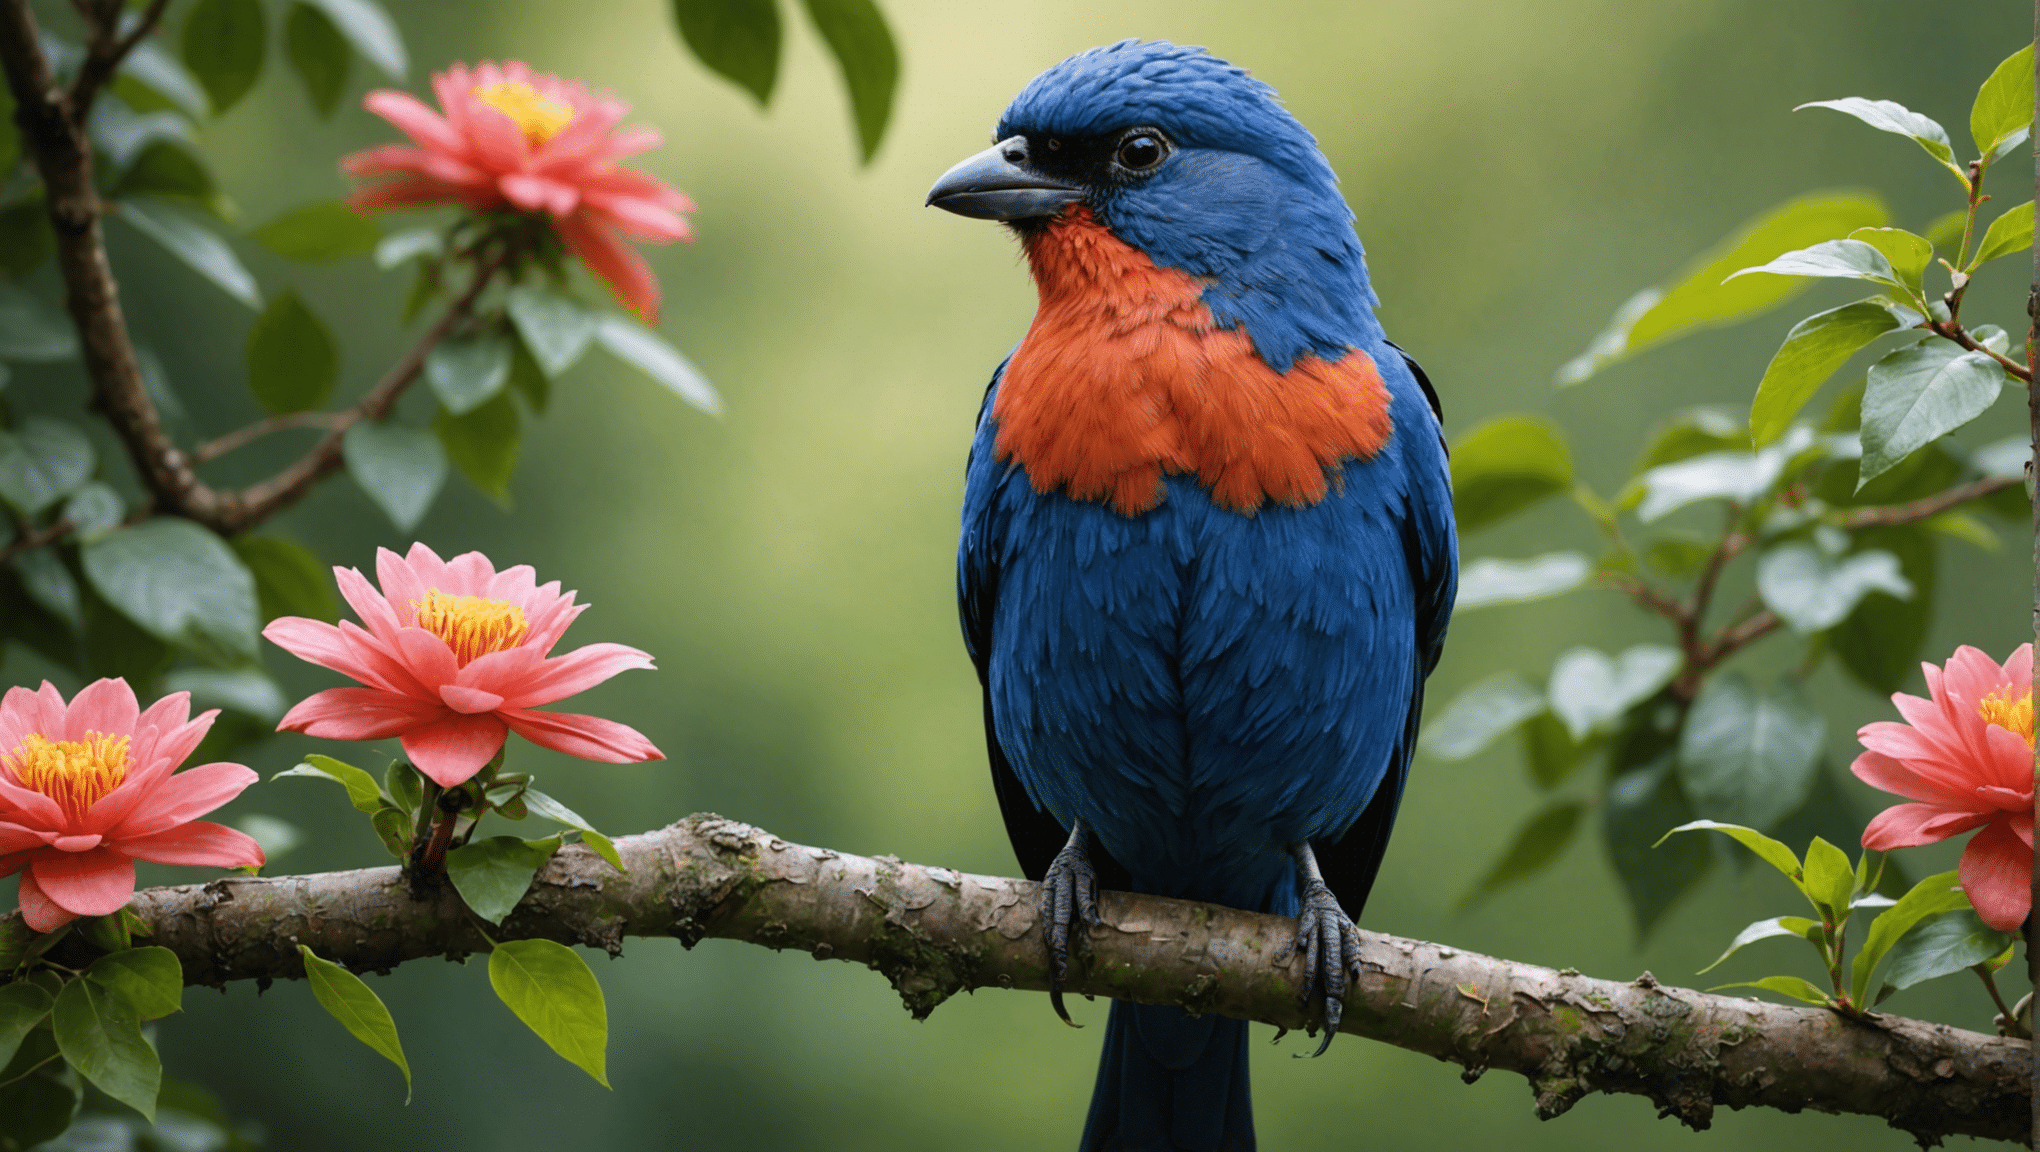 are ugly birds actually beautiful? find out in this fascinating exploration of nature's hidden beauty and the surprising truth behind the beauty of seemingly ugly birds.